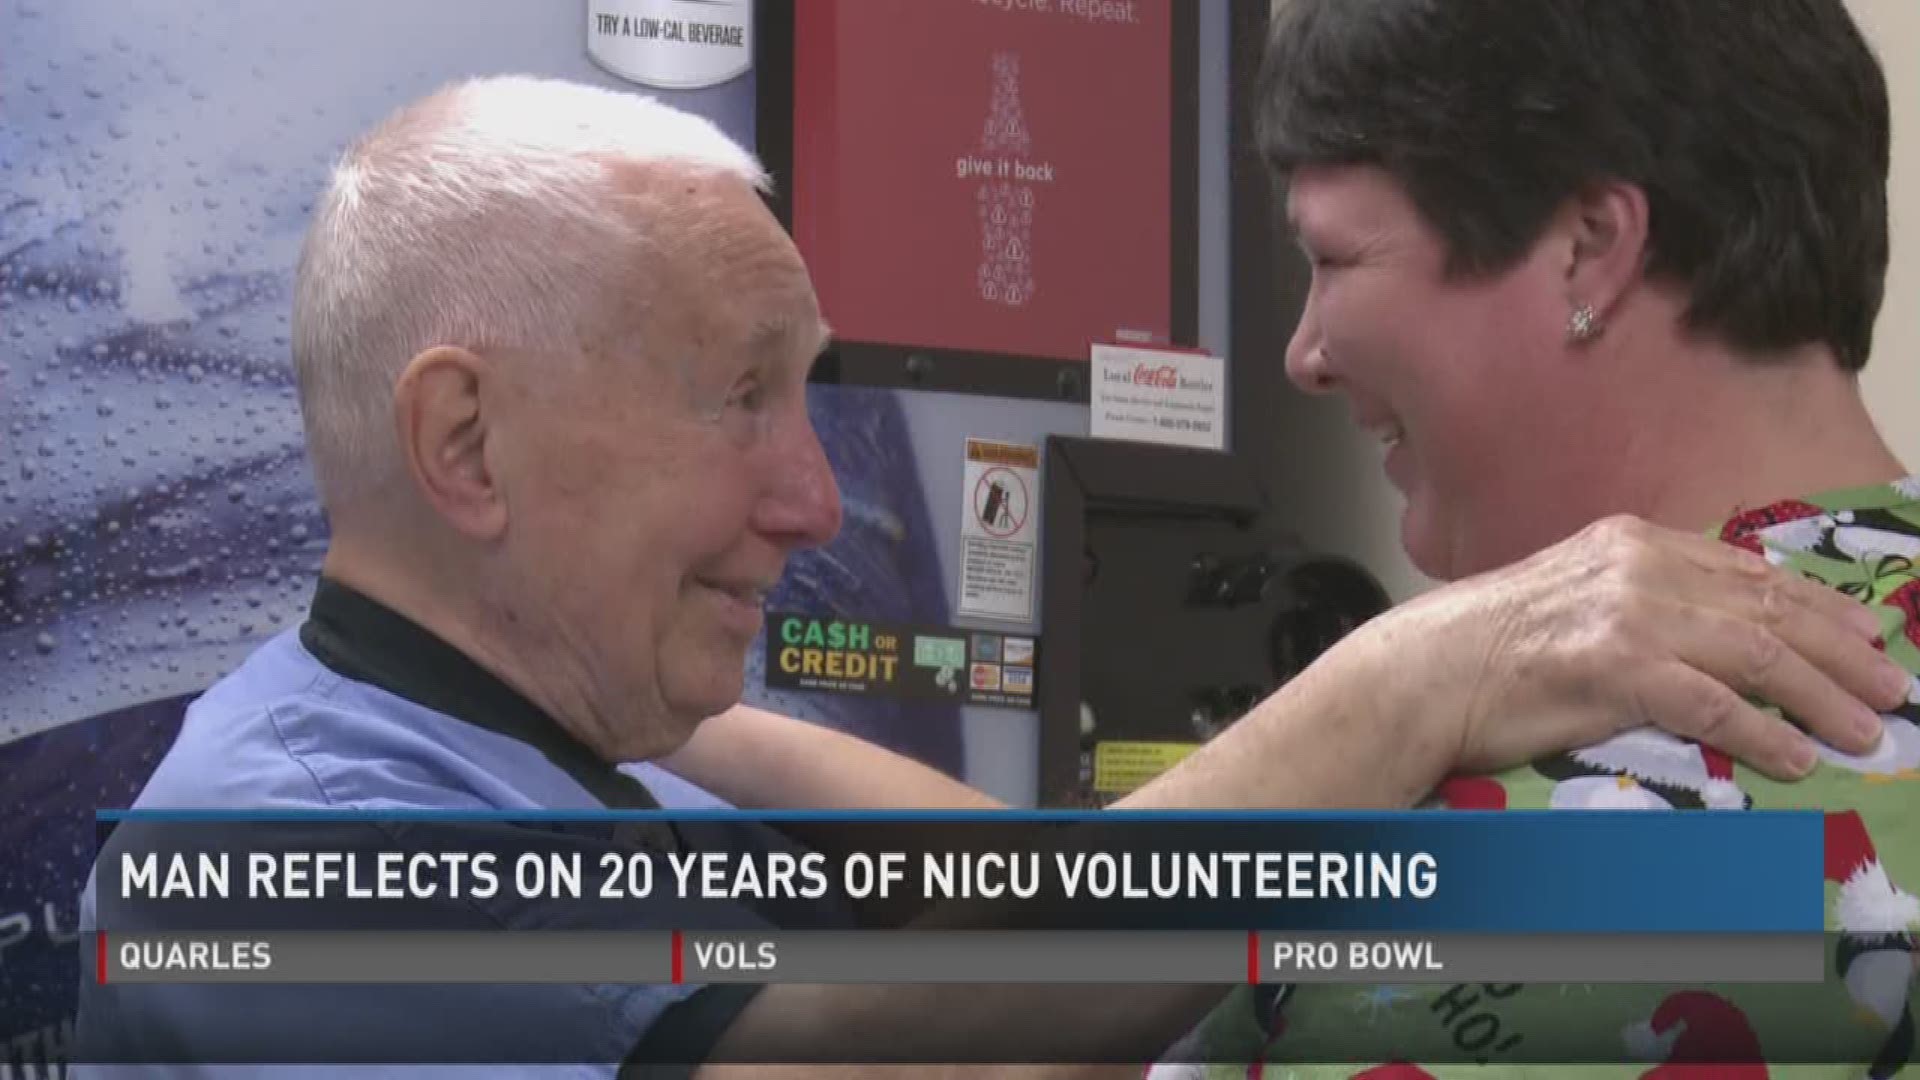 Woody Troy has served as a volunteer cuddler at the University of Tennessee Medical Center's NICU for the last 20 years.